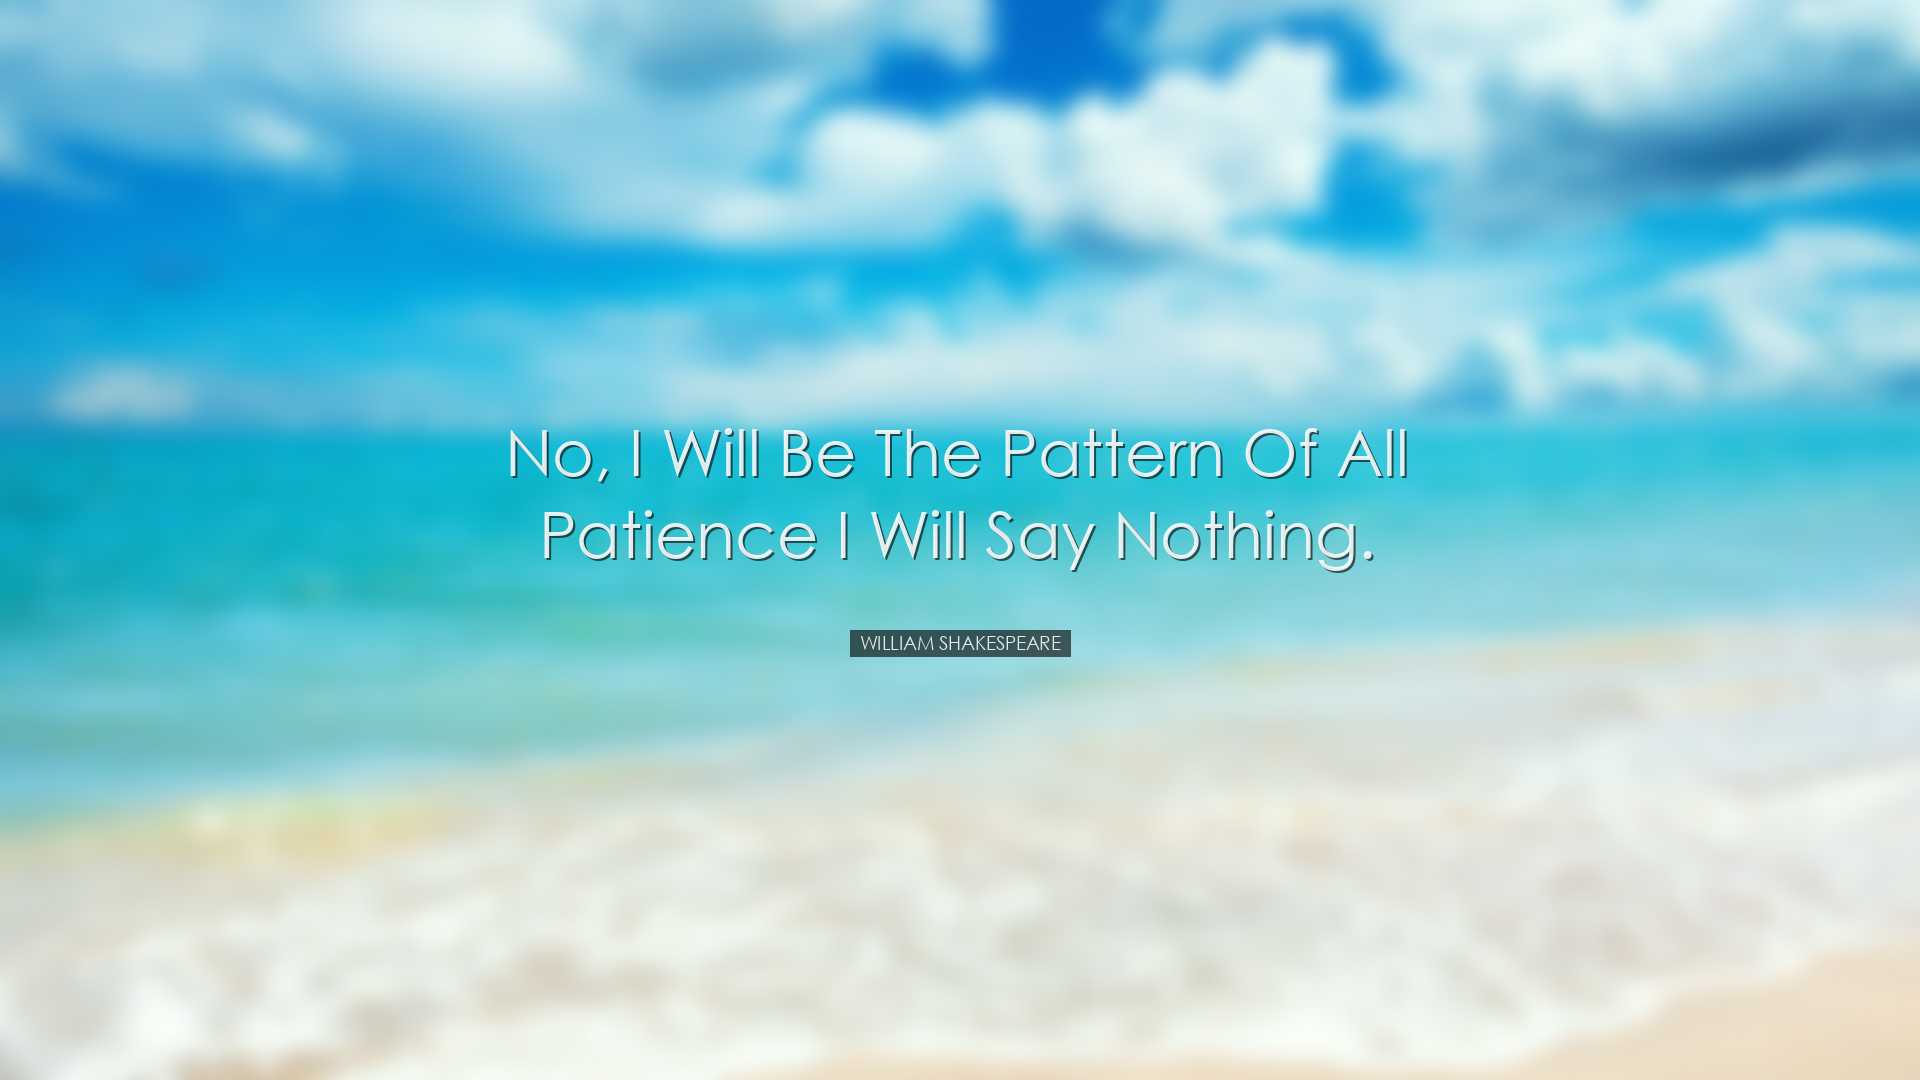 No, I will be the pattern of all patience I will say nothing. - Wi